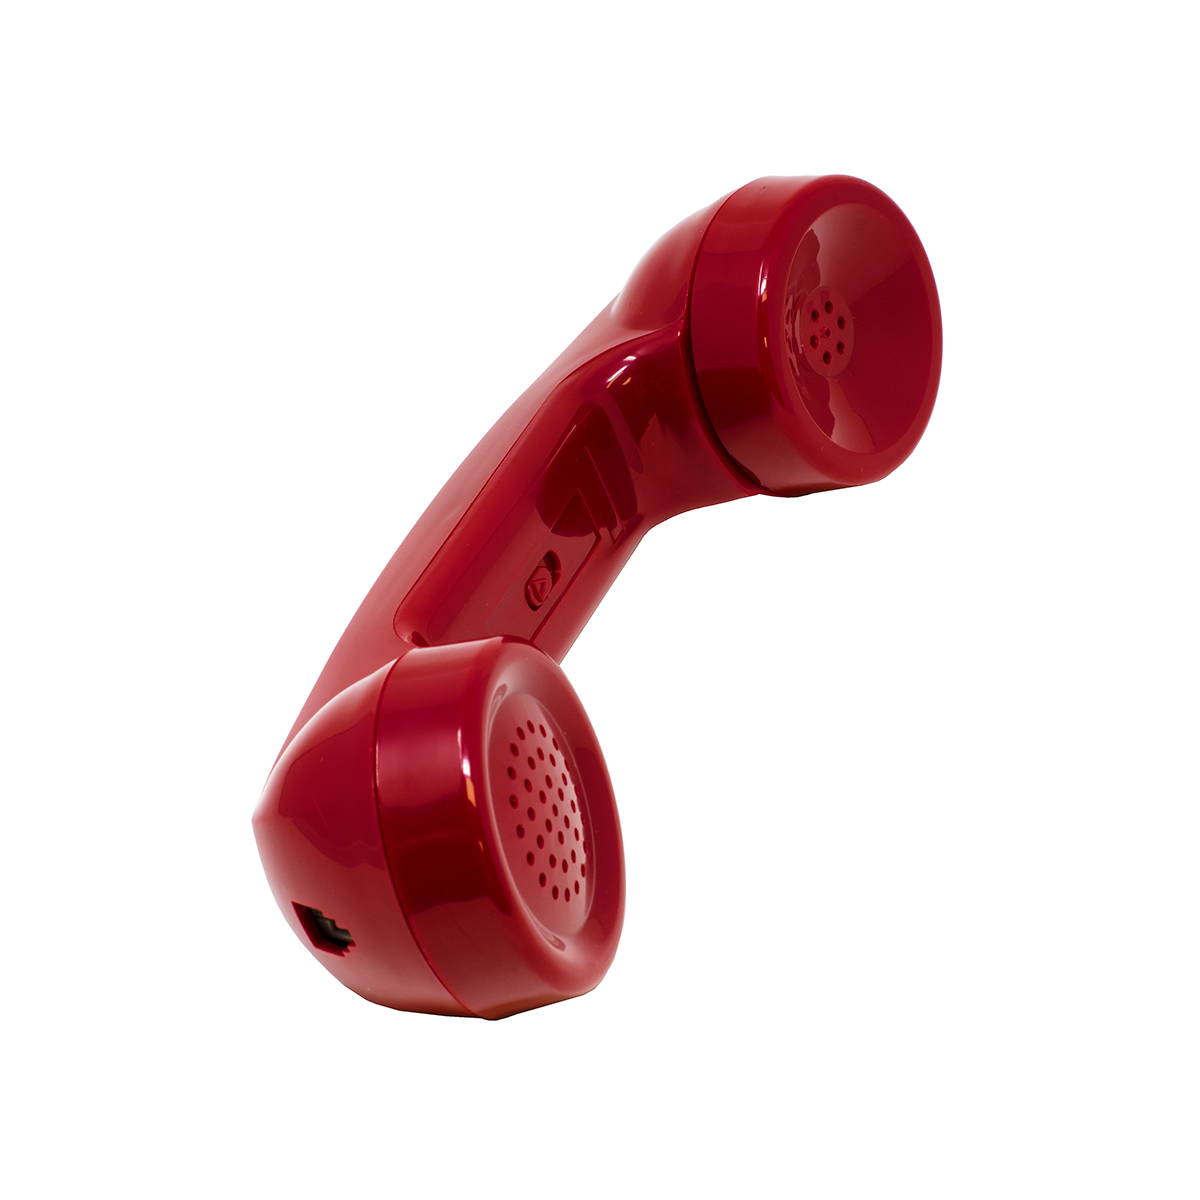 Red Amplified Replacement Handset for 2500/2554 Phones